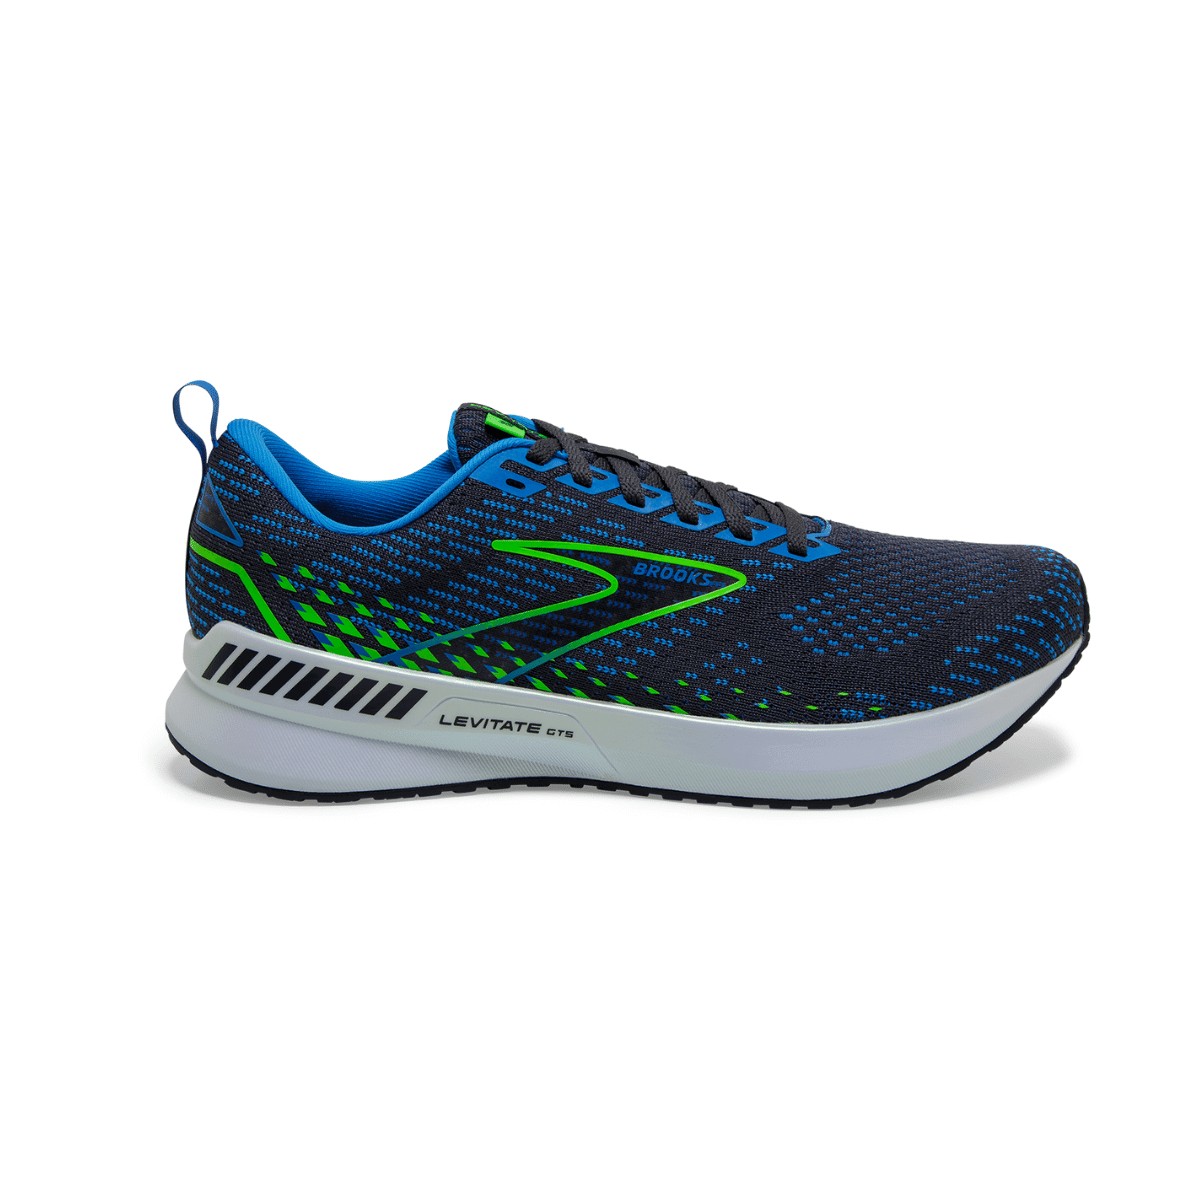 Brooks Levitate GTS 5 Shoes Blue Green AW21, Size 42,5 - EUR